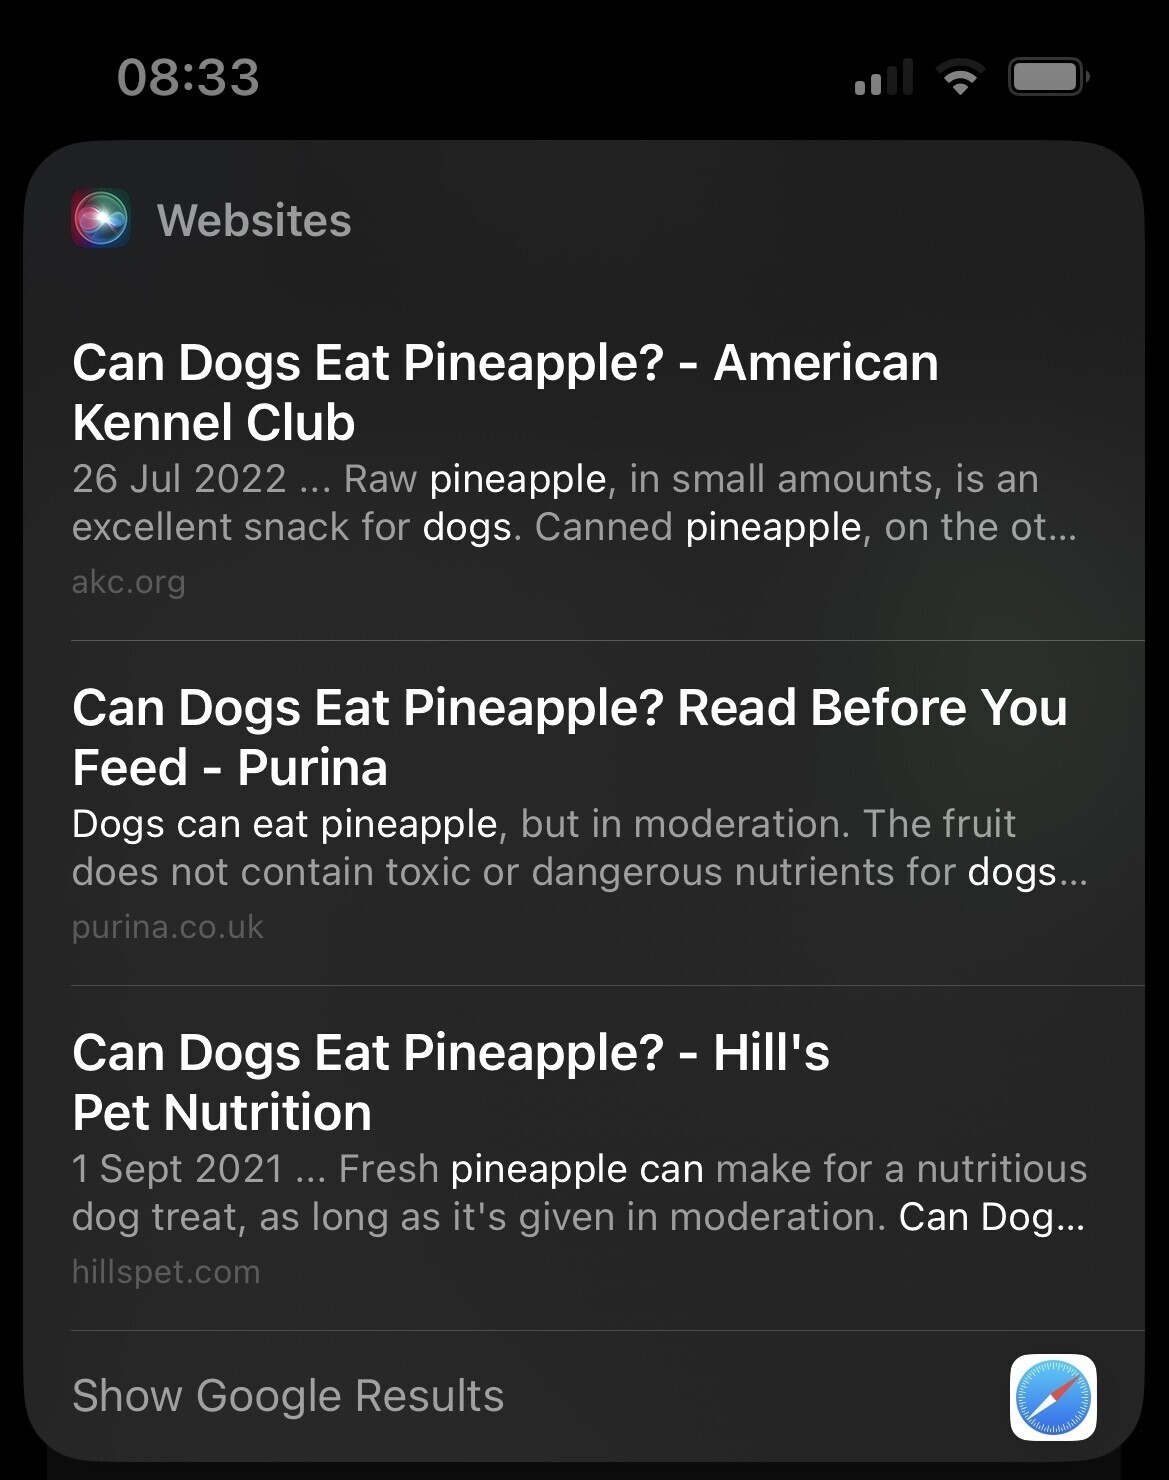 Siri's results for “Hey Siri, can dogs eat pineapple?”